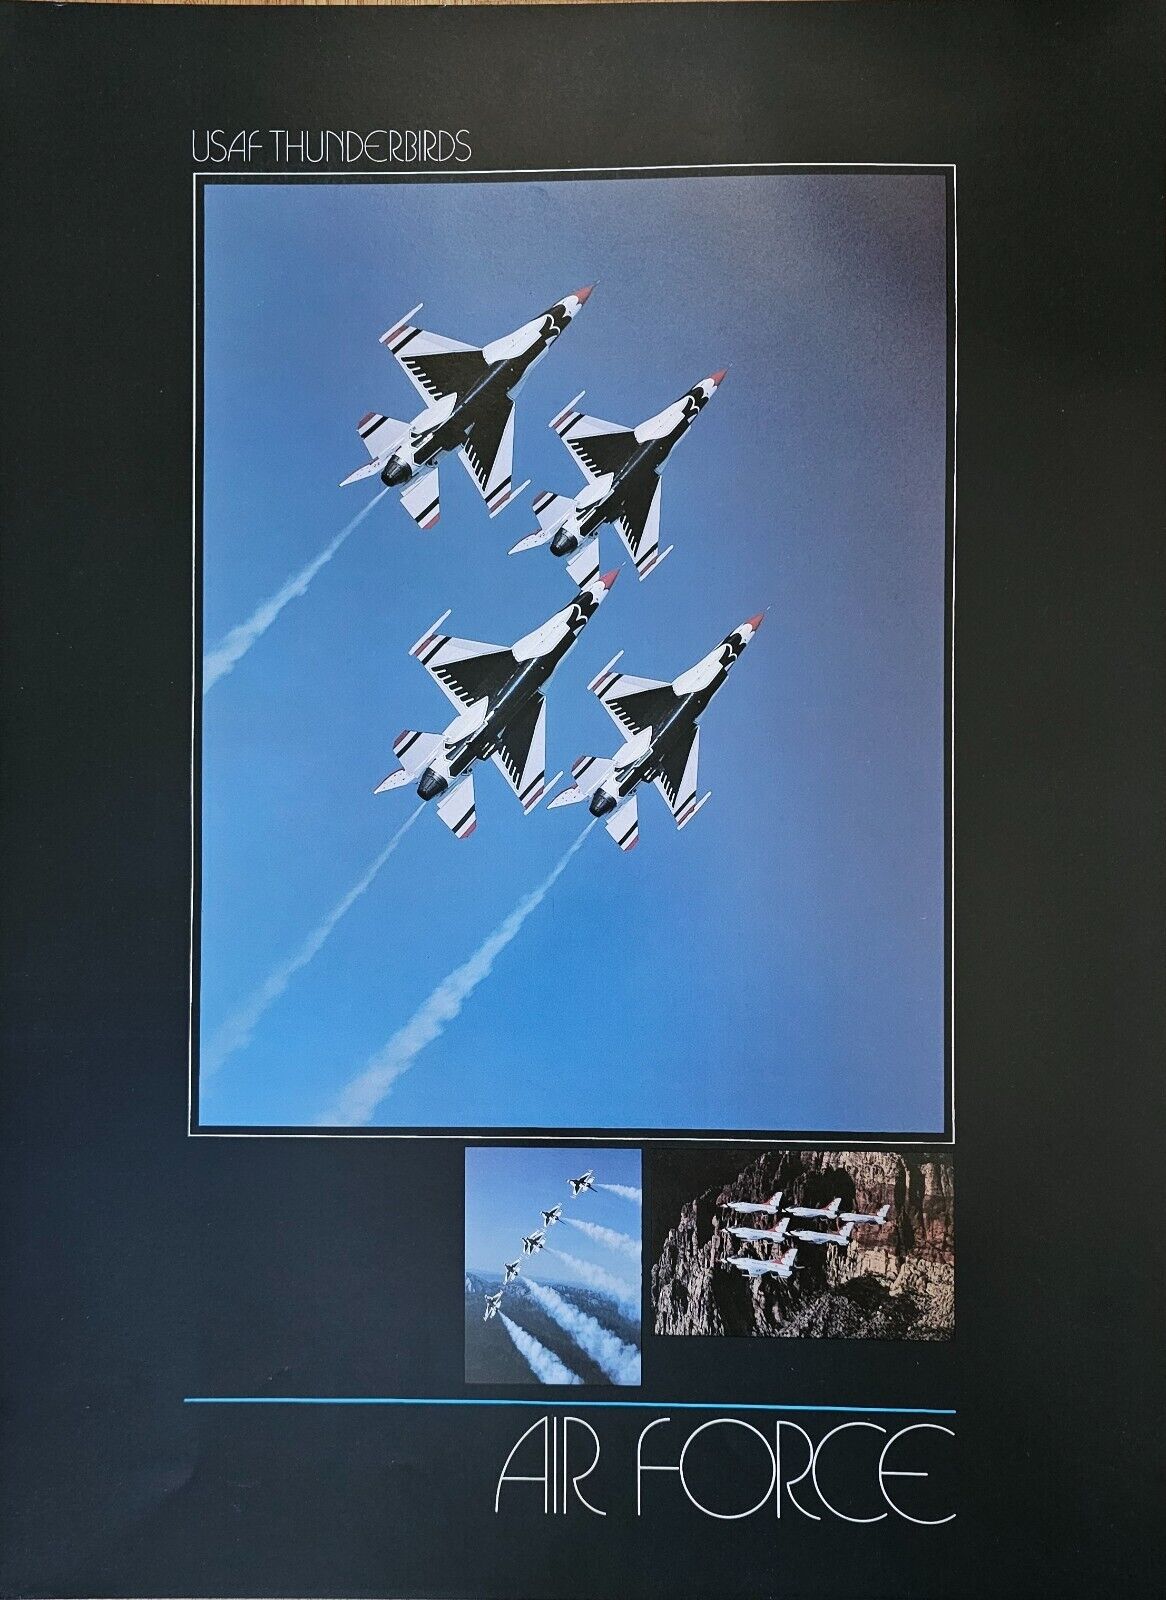 VINTAGE 1980'S ERA OFFICIAL US AIR FORCE THUNDERBIRDS F-16 23X17 COLOR POSTER